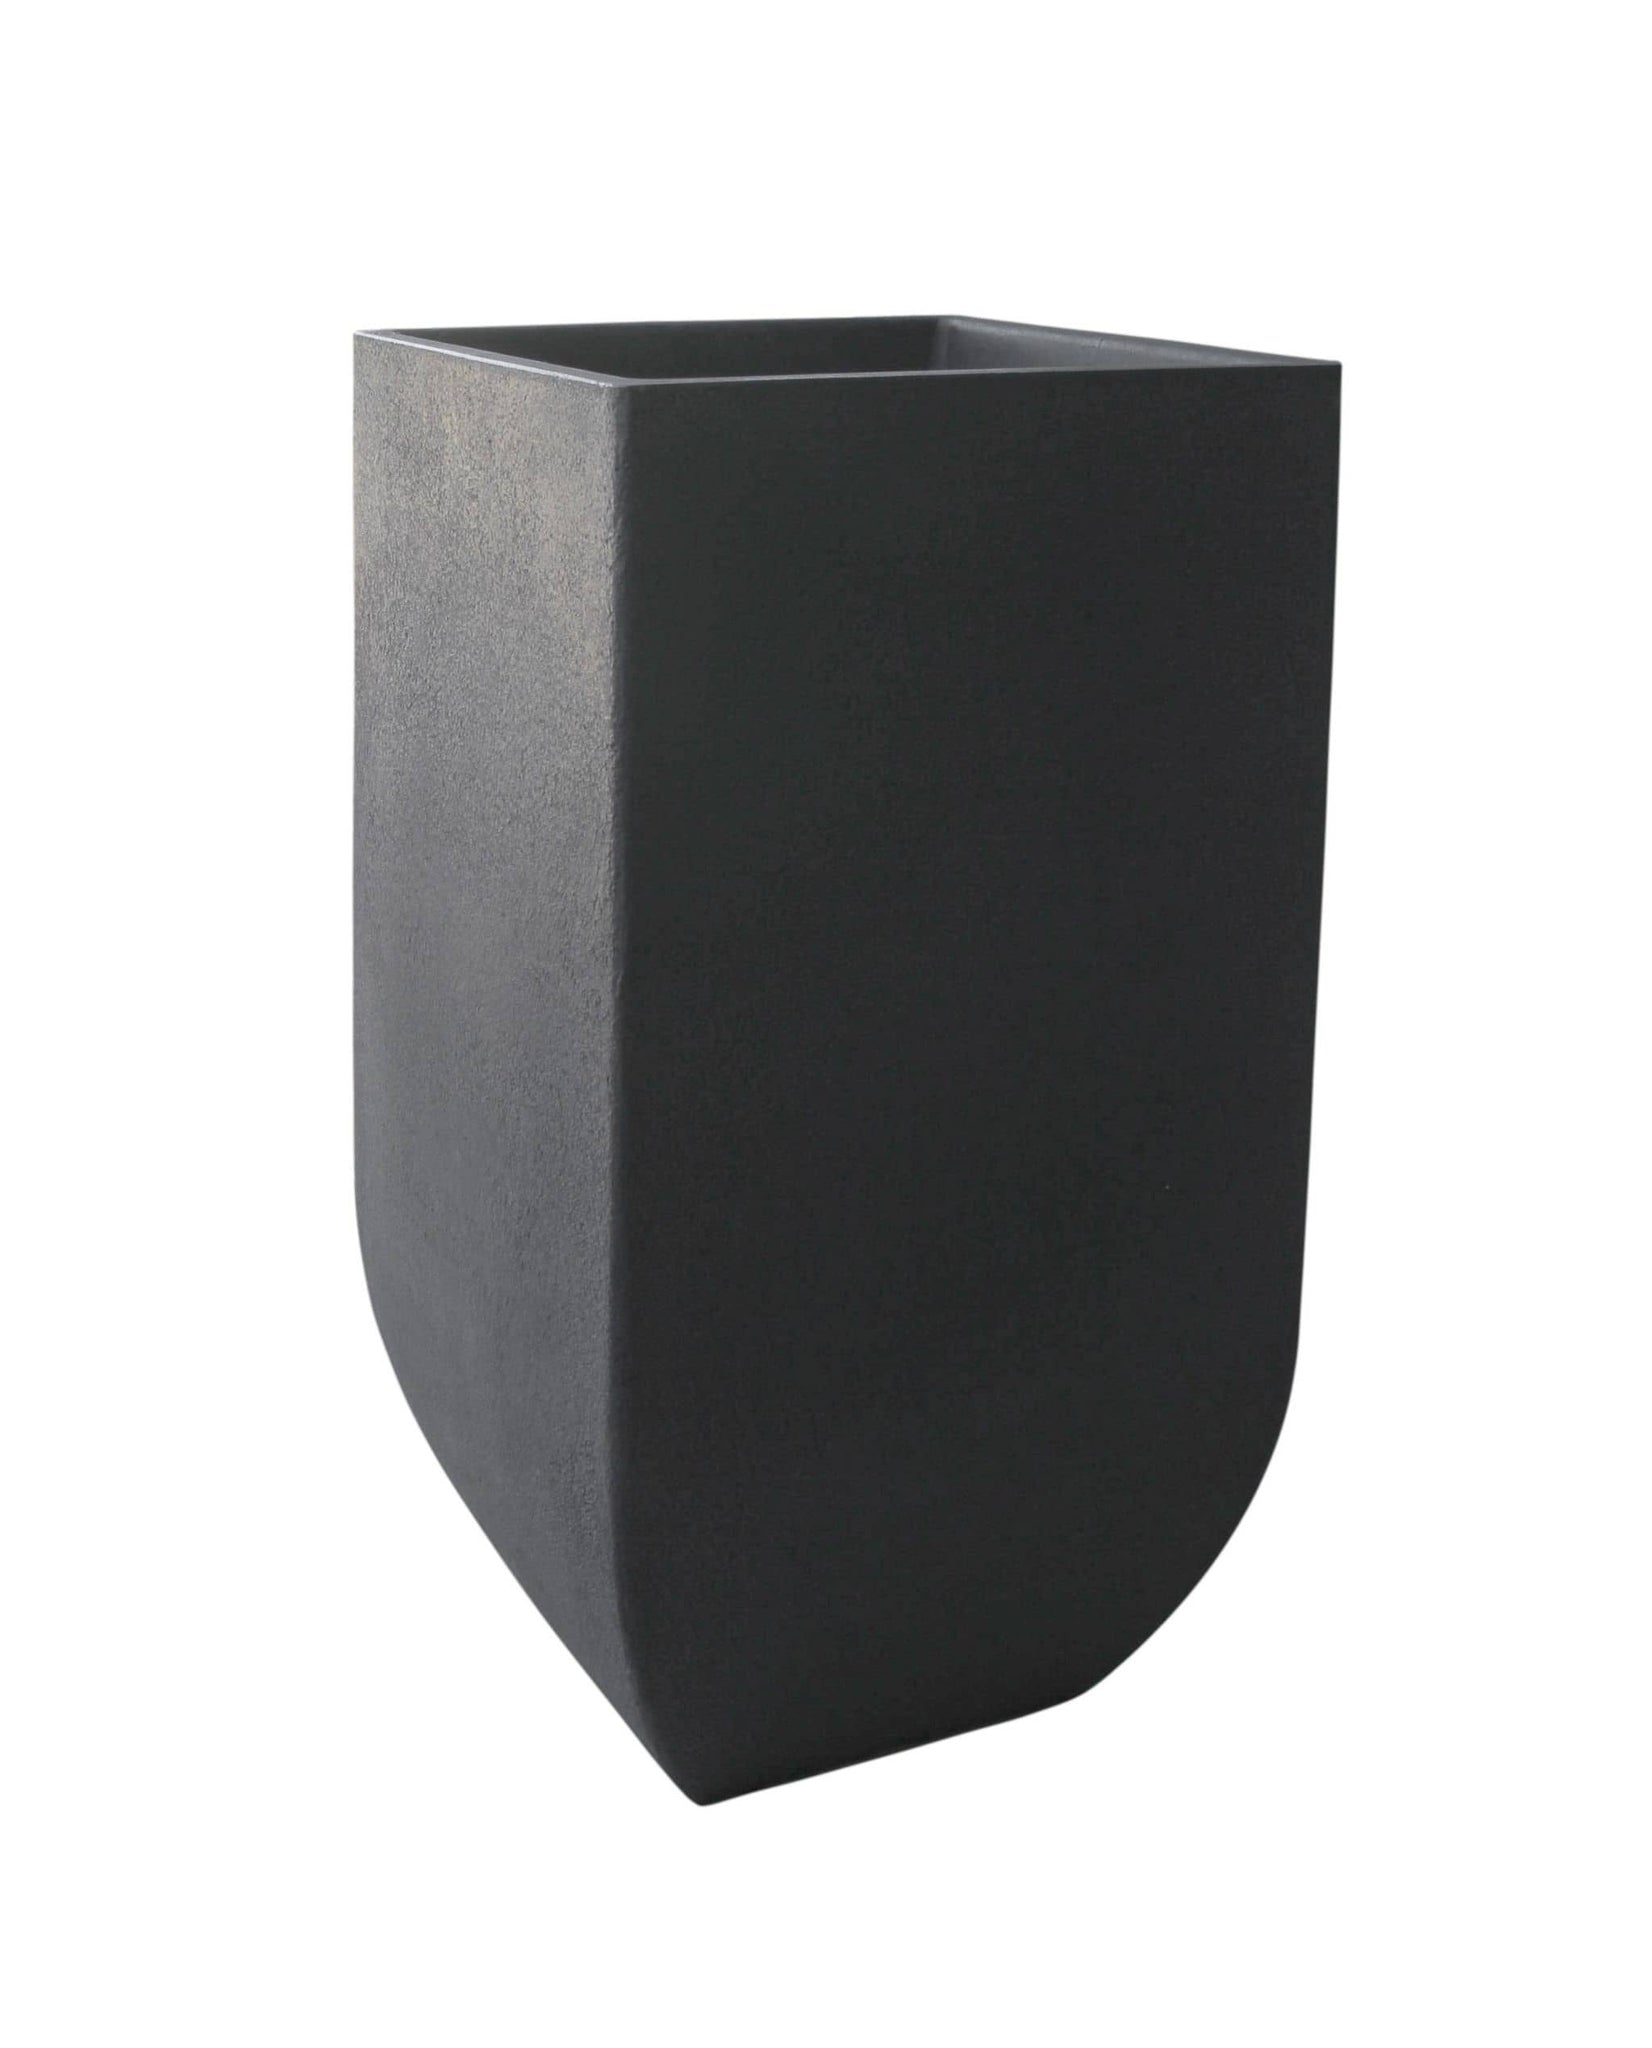 side angled view of the Japi verticale square planter, tall, upright, colour lead (black)